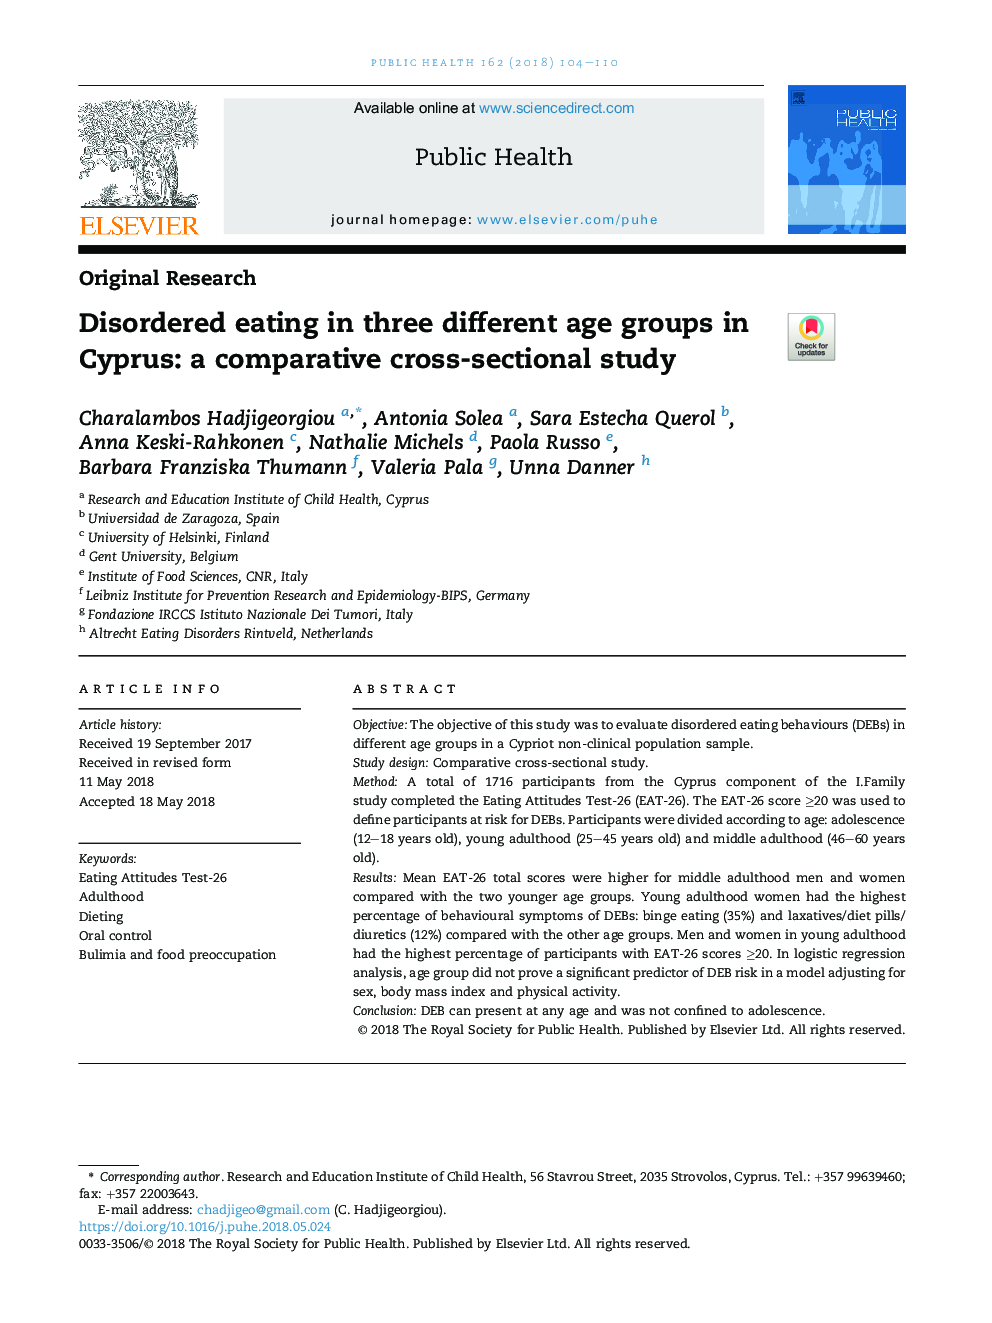 Disordered eating in three different age groups in Cyprus: a comparative cross-sectional study